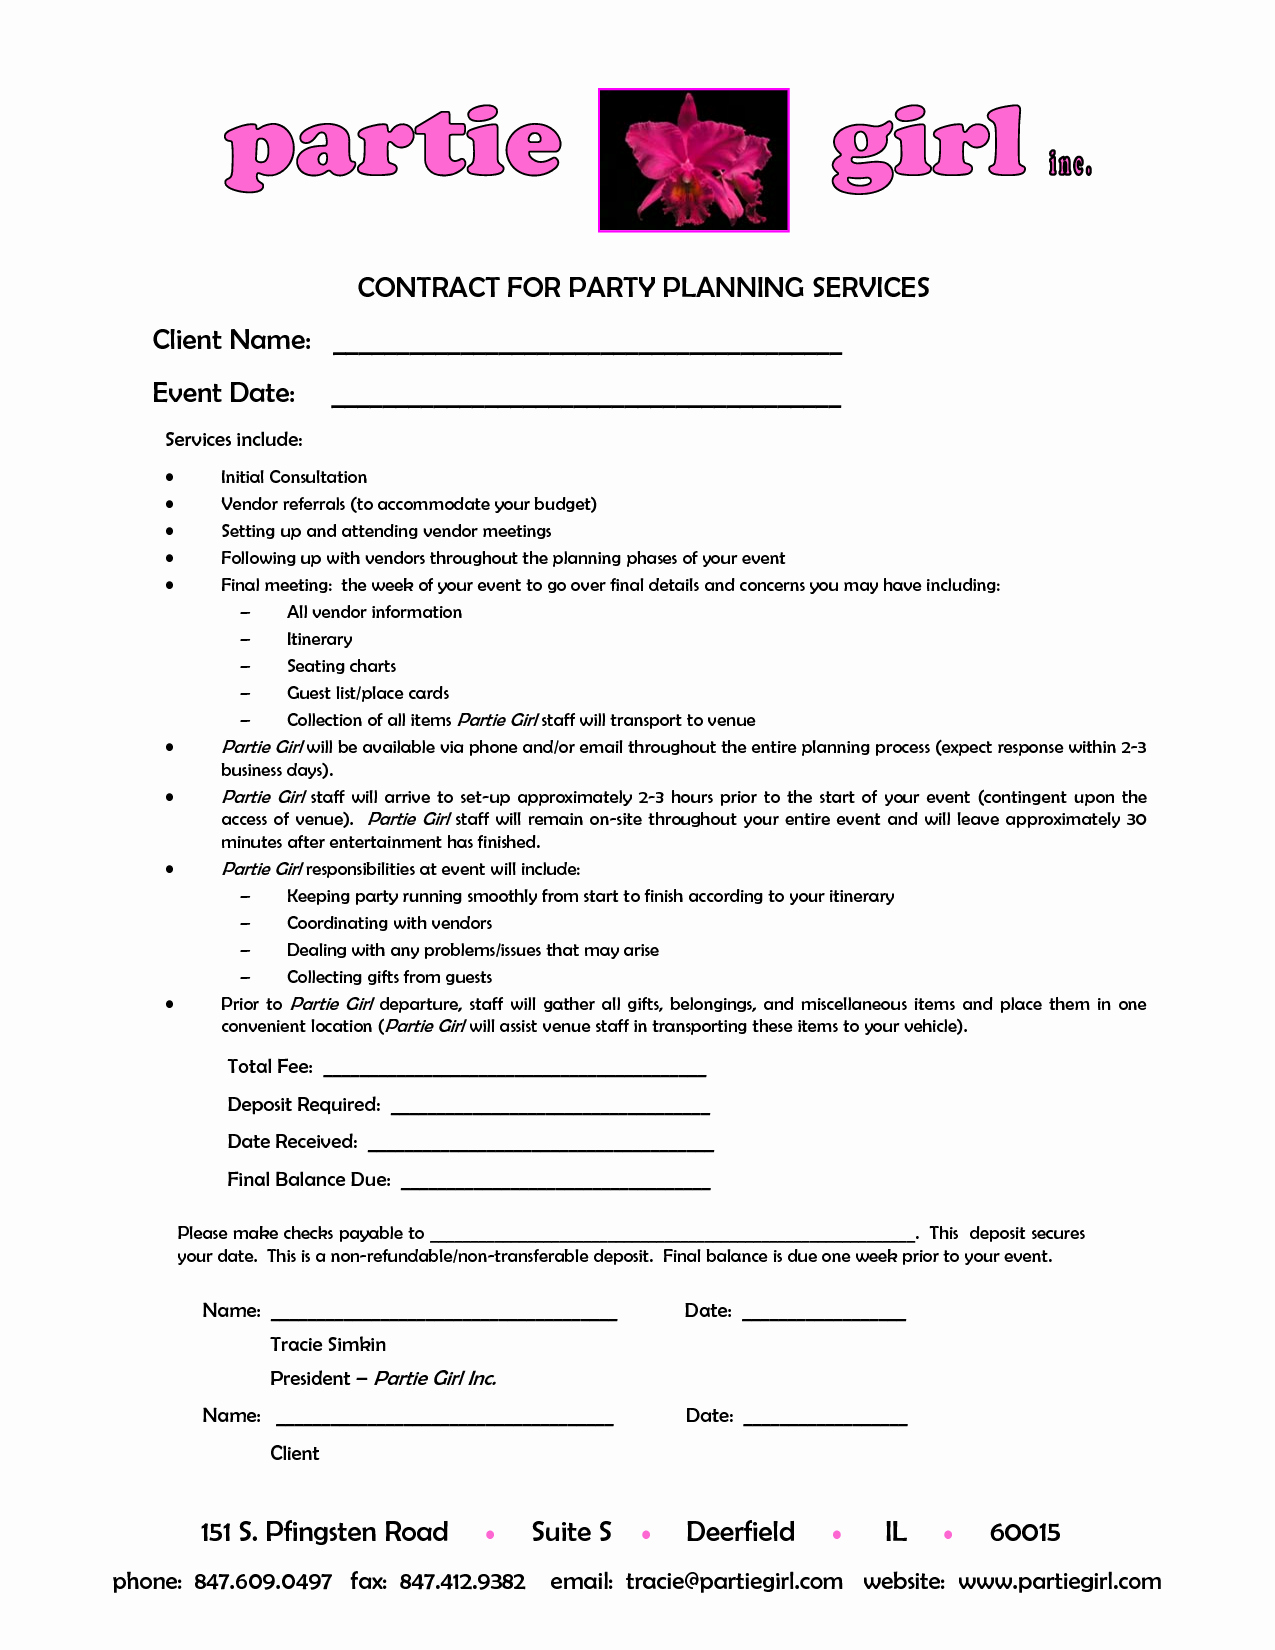 Wedding Planning Contract Templates New Party Planner Contract Template Google Search